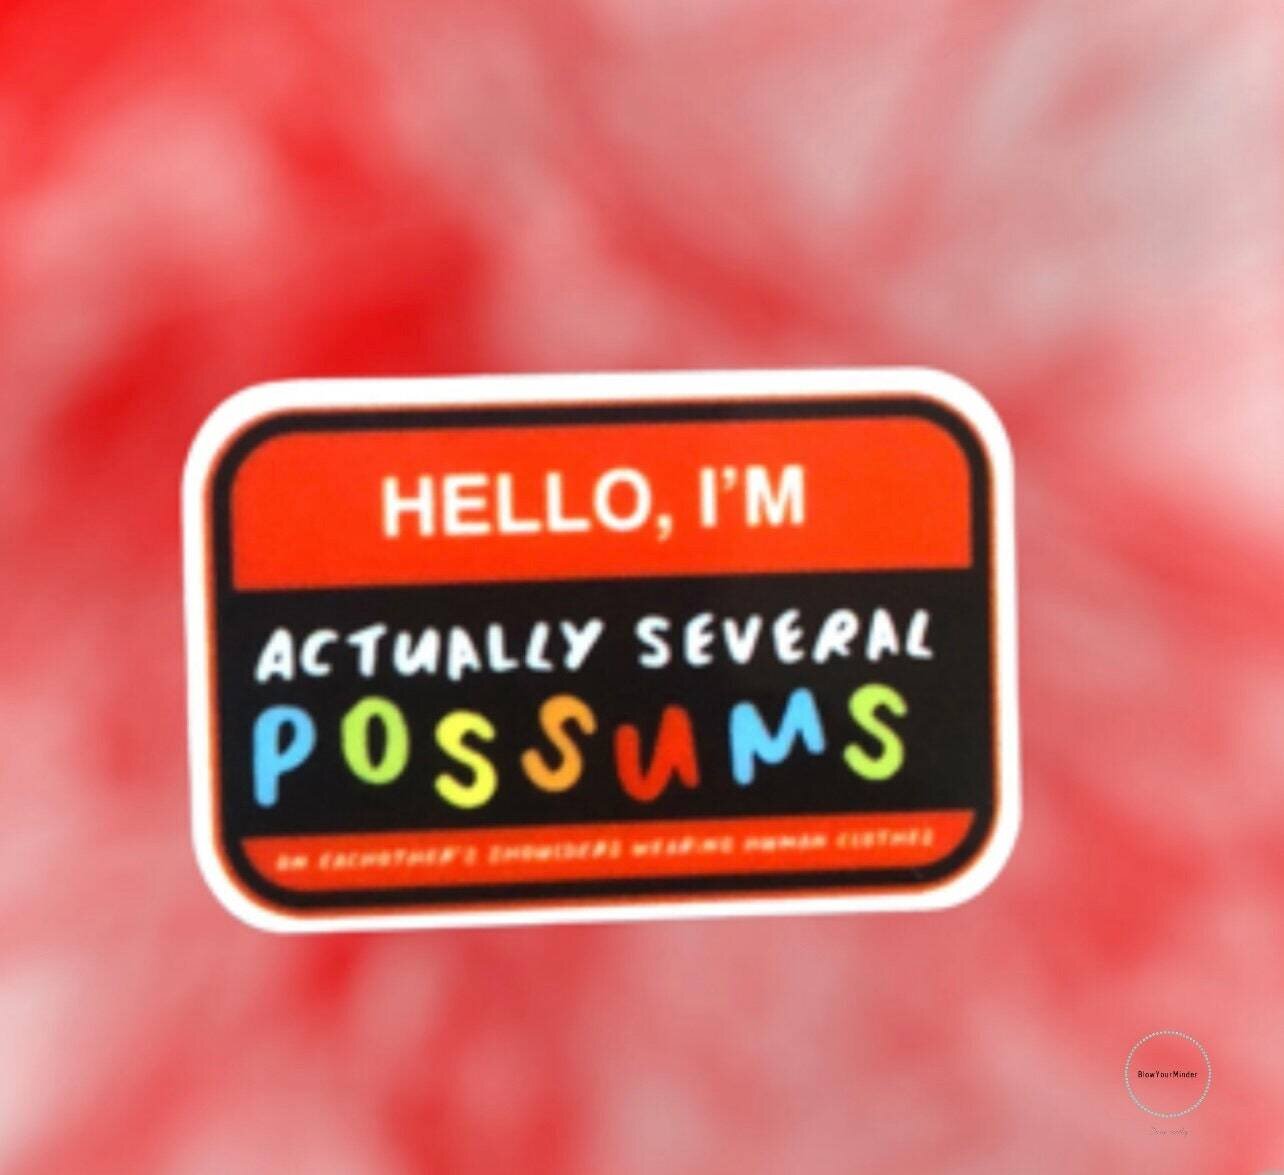 I’m Actually Several Possums - Acrylic - Needle Minder - Pin - Magnet